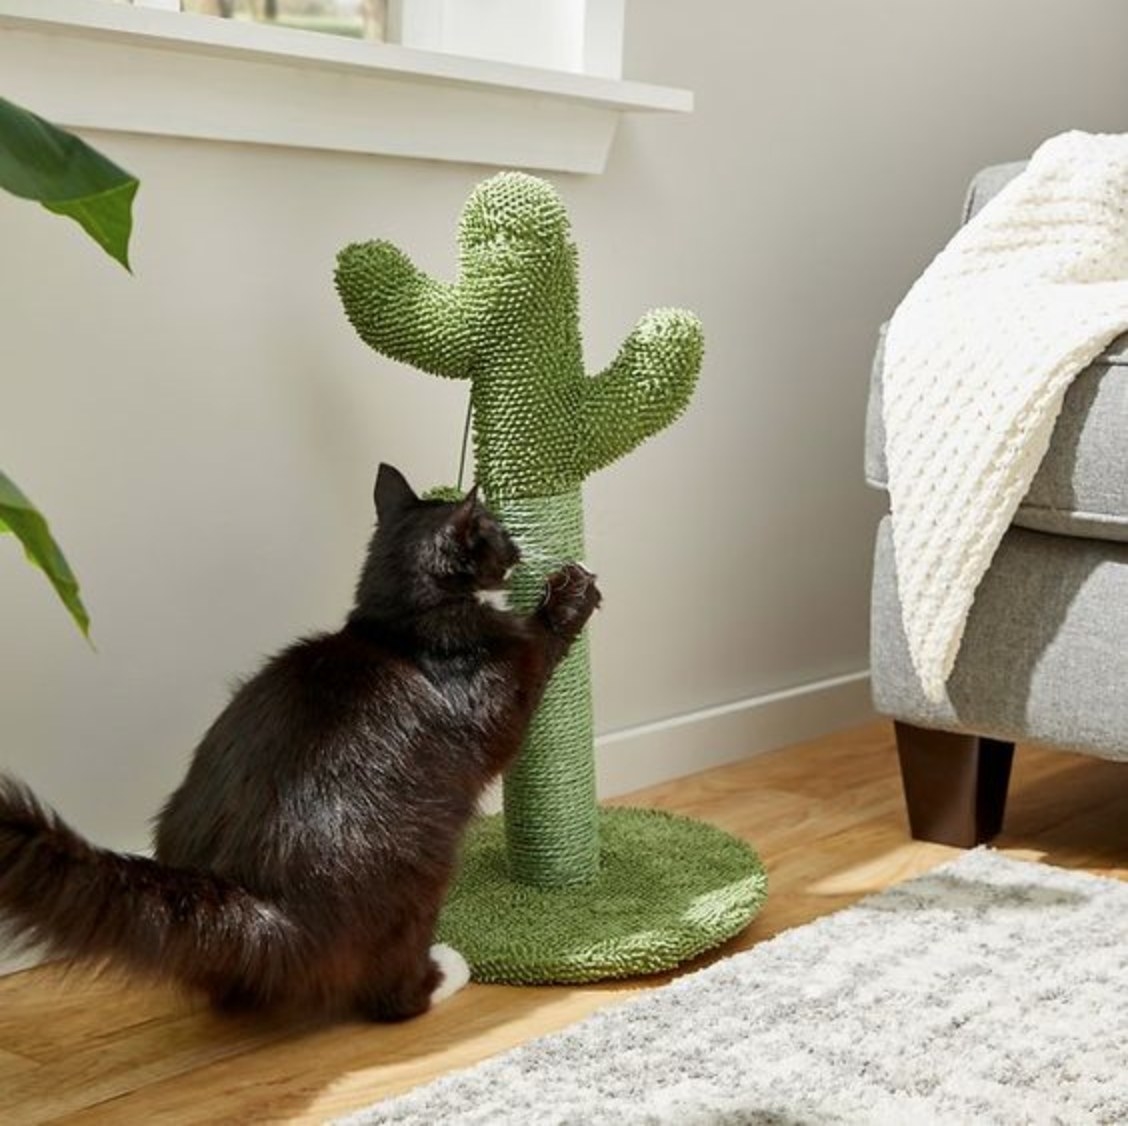 A kitty scratching the cactus shaped post